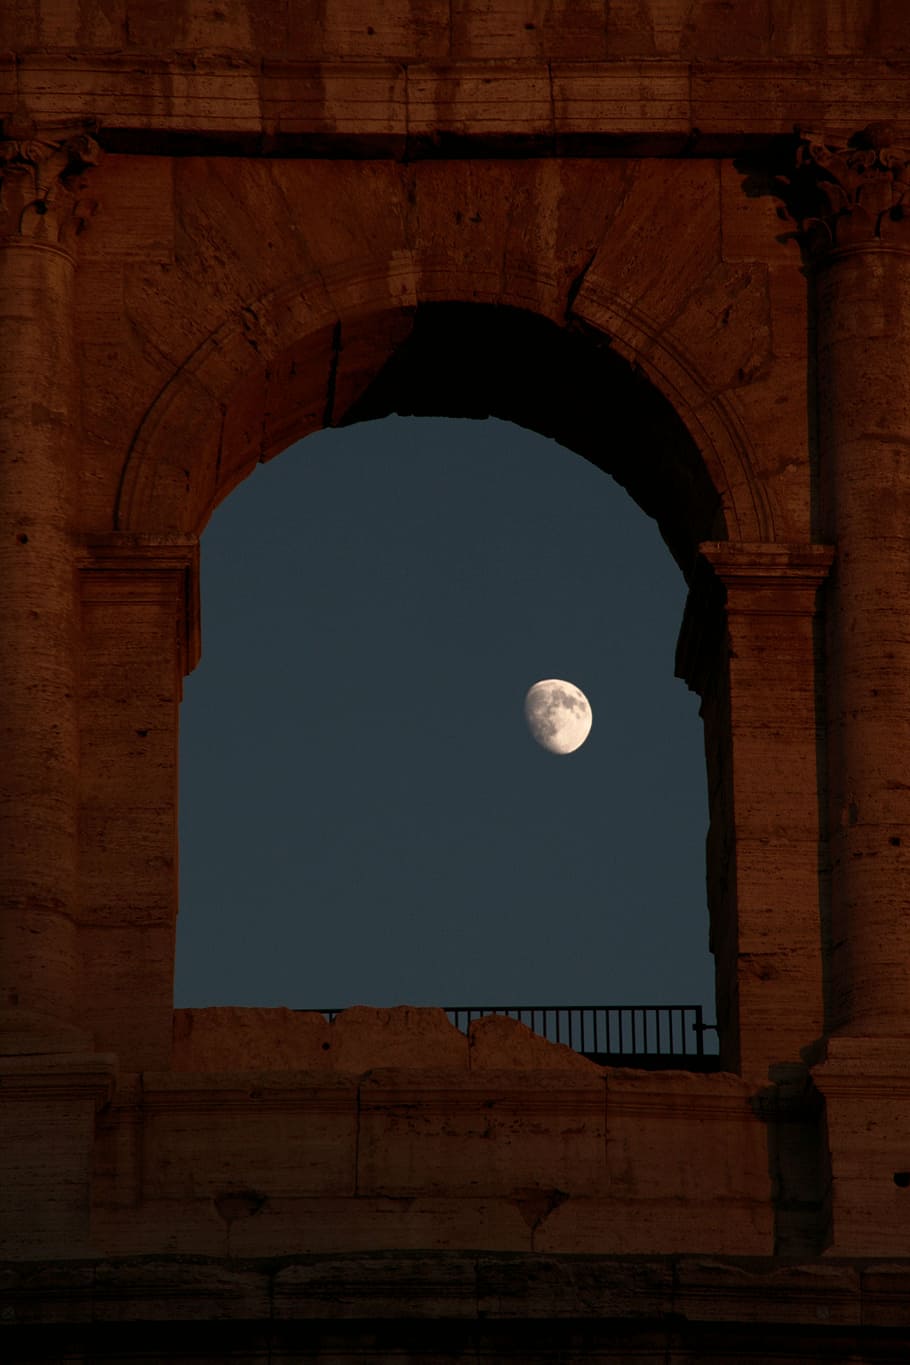 grey concrete structure, rome, colosseum, moon, window, italy, building, antiquity, roman, historically